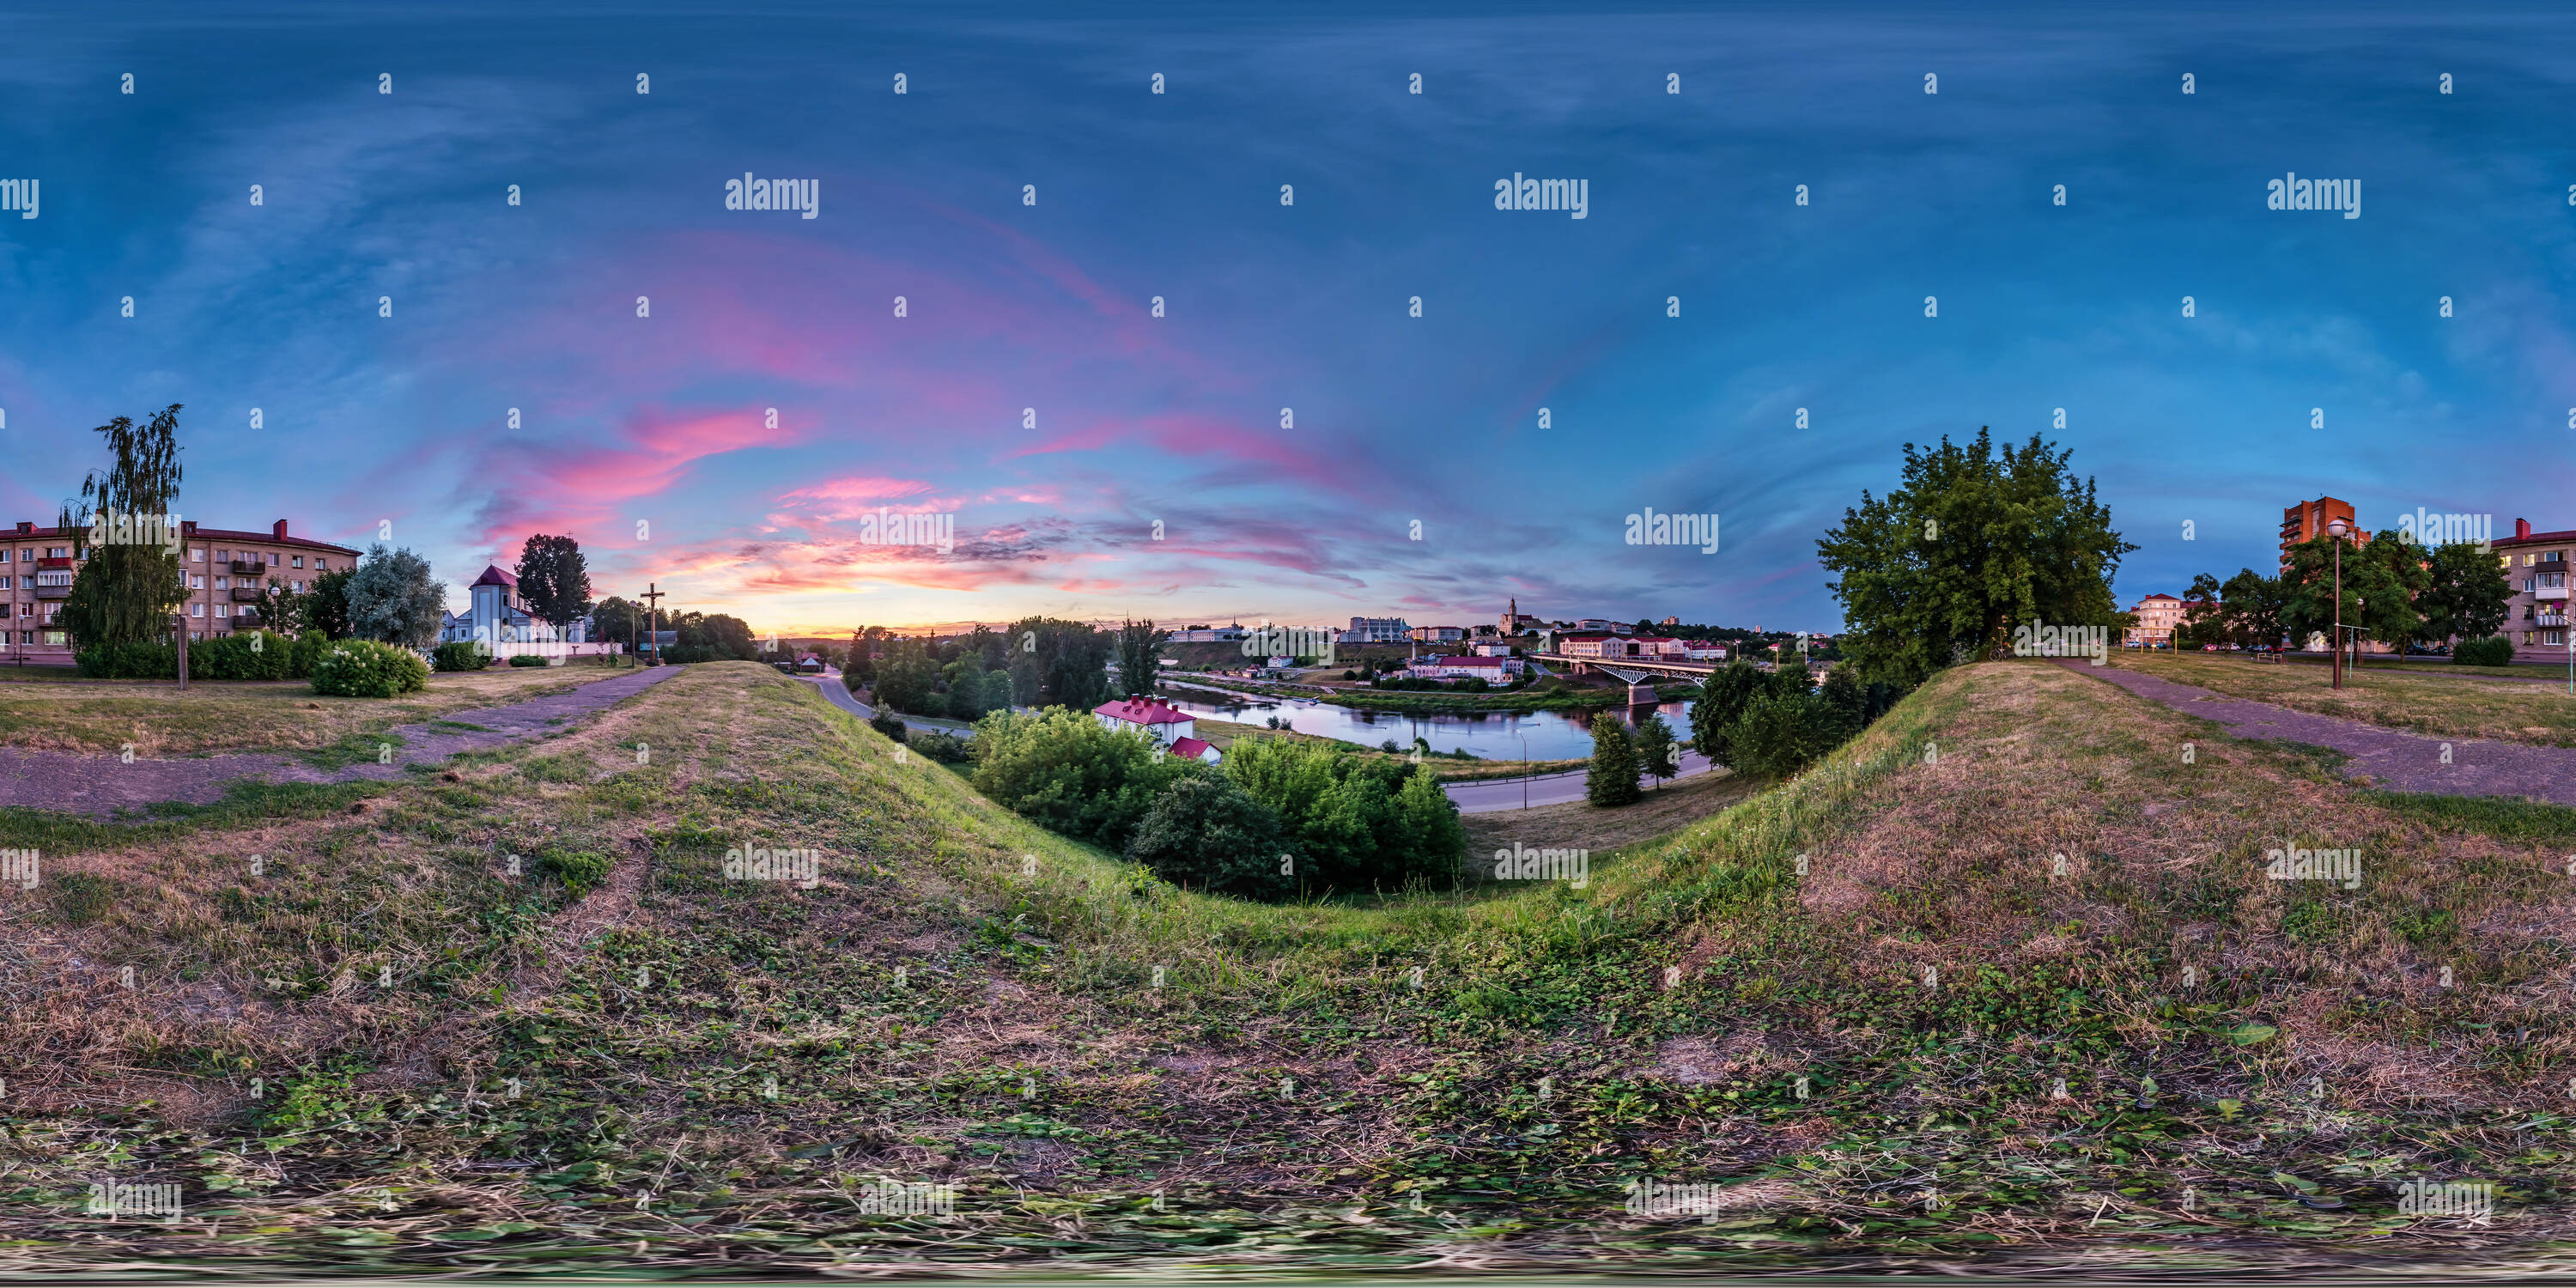 360 degree panoramic view of full seamless spherical hdri panorama 360 degrees angle view on bank of wide river overlooking old city in sunset with beautiful clouds in equirectang